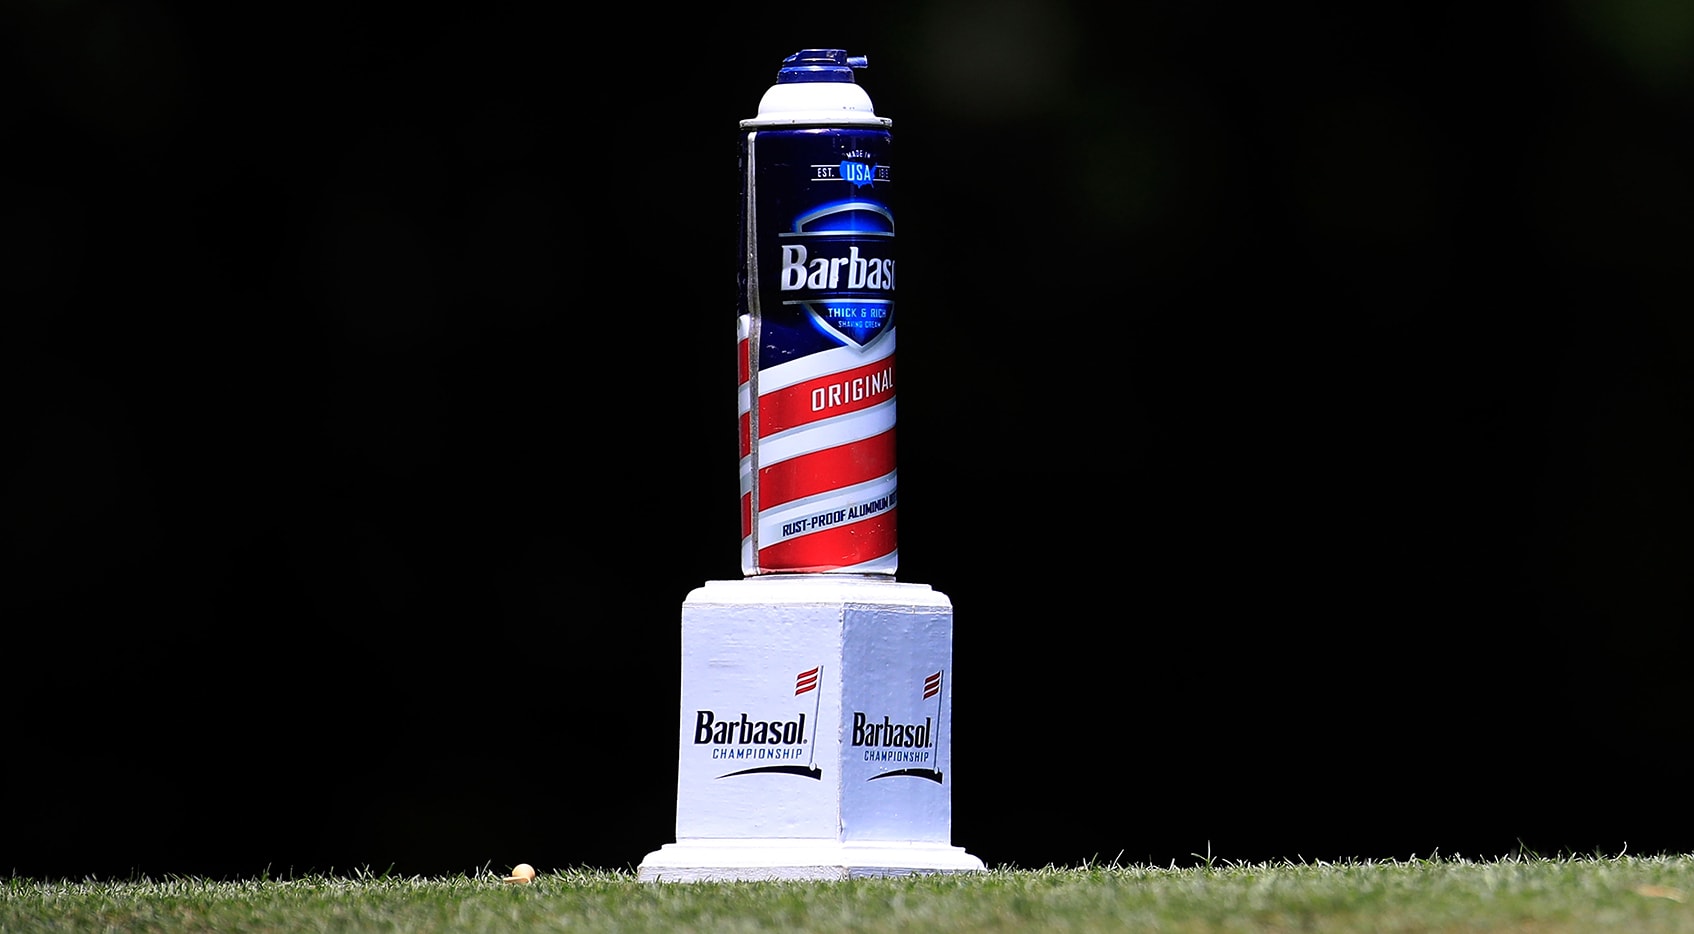 How to watch Barbasol Championship, Round 1 TV times, live scoring